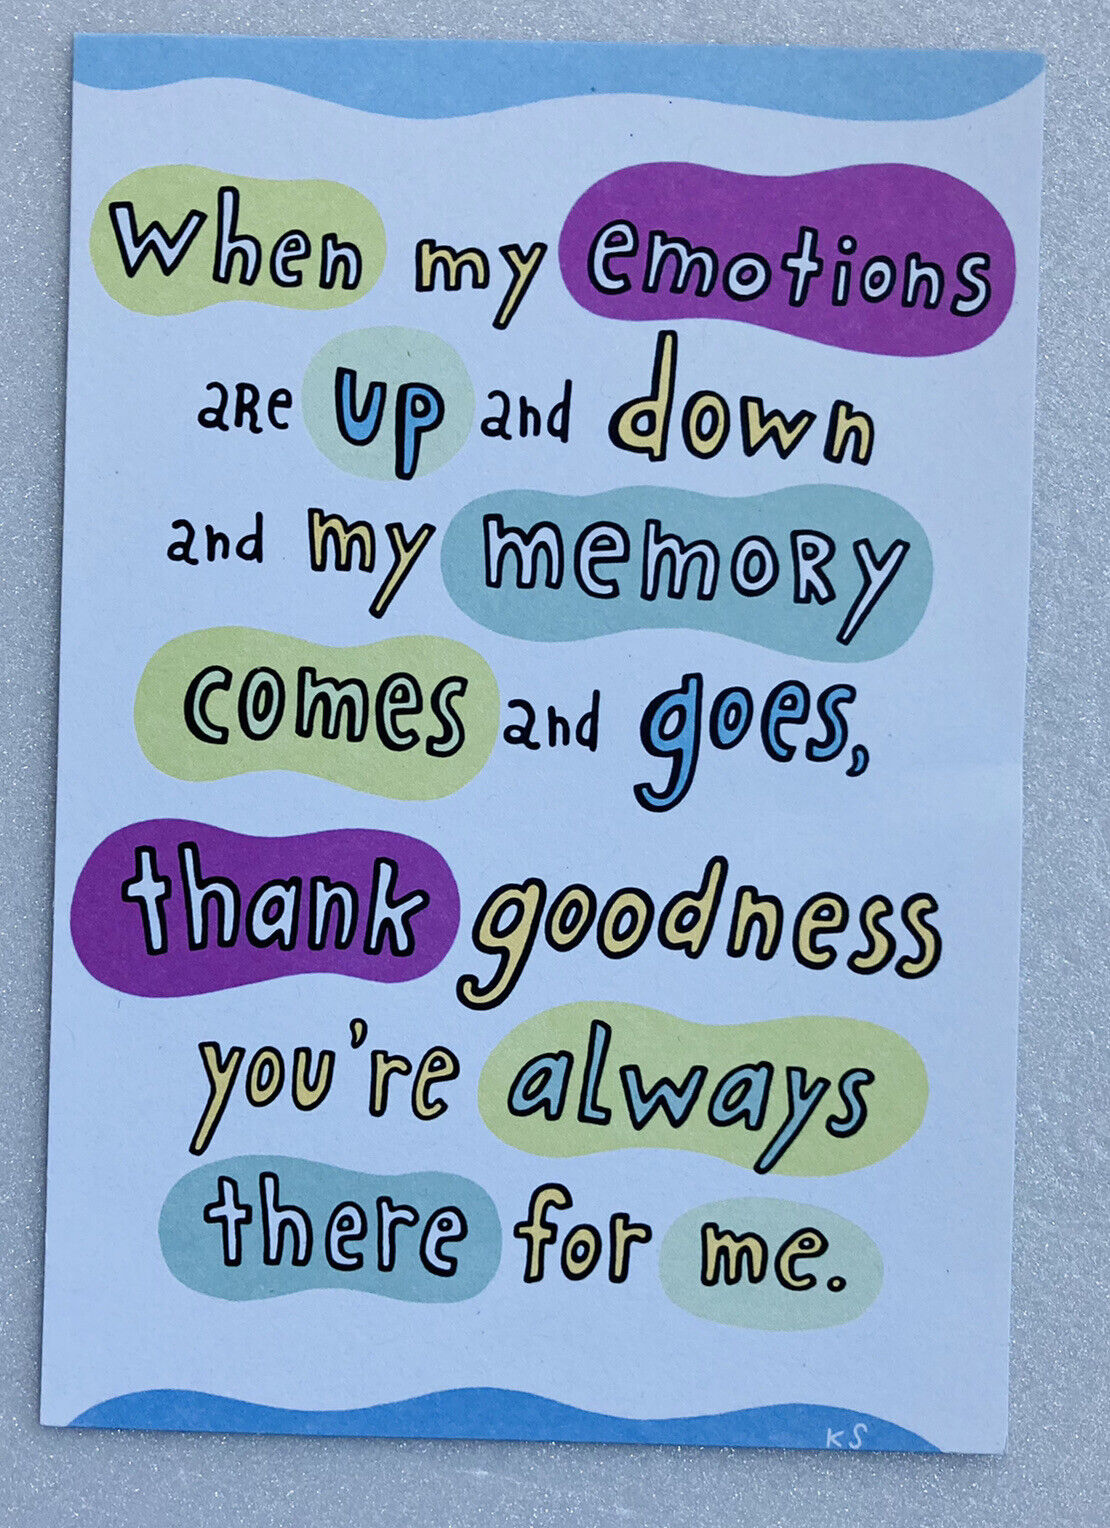 VTG Hallmark Shoebox Anniversary Card “Thank Goodness You’re Always There” P1